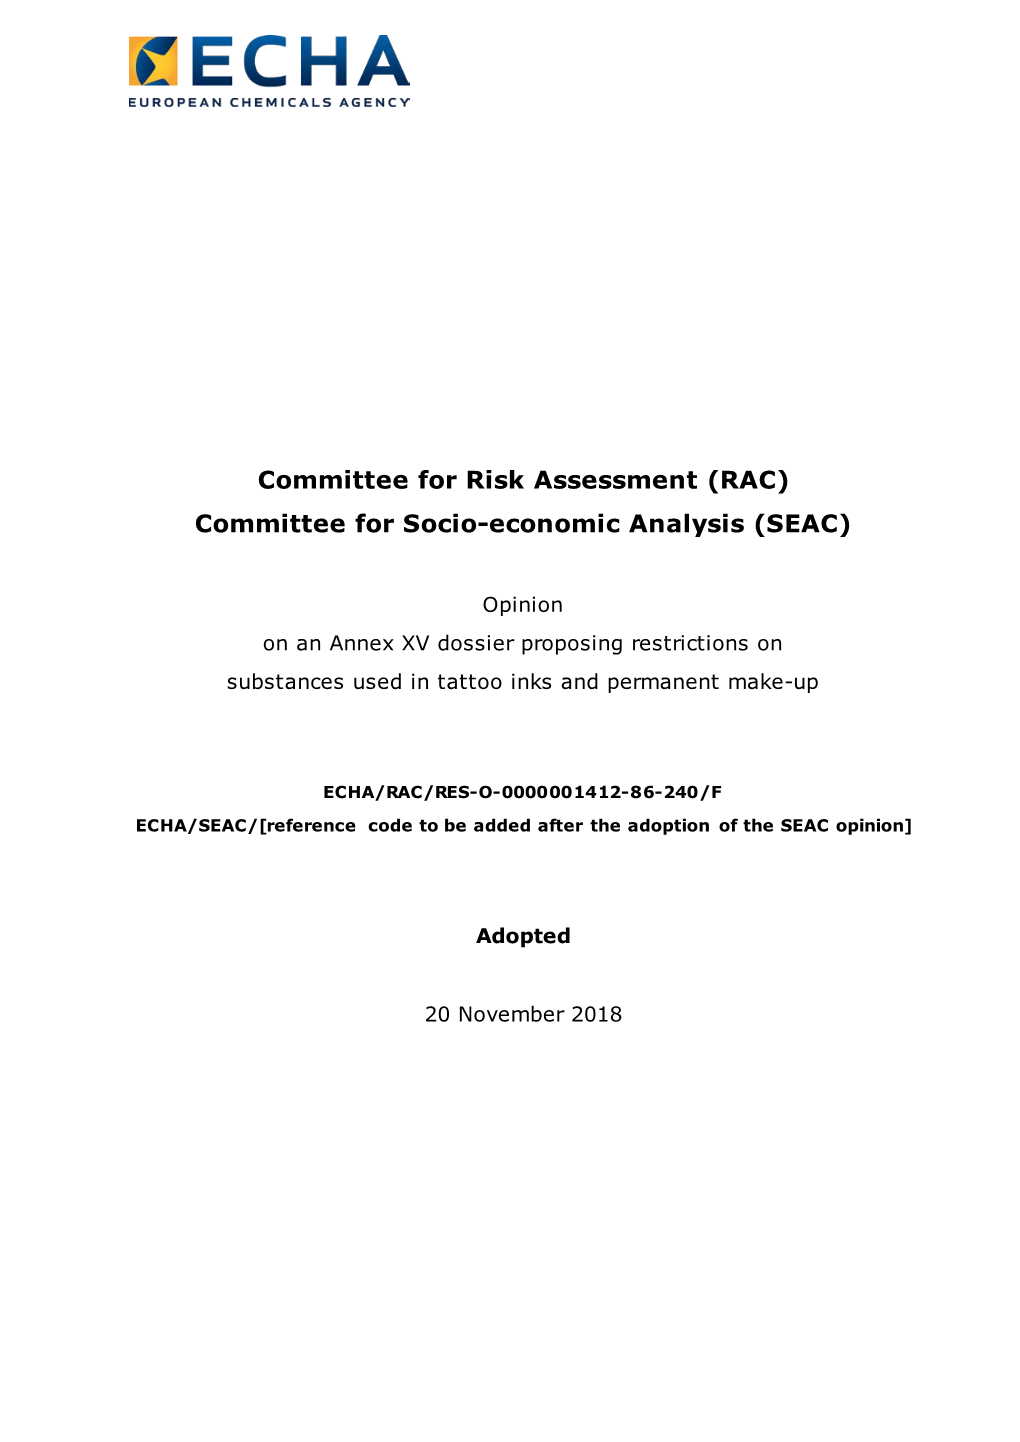 Committee for Risk Assessment (RAC) Committee for Socio-Economic Analysis (SEAC)